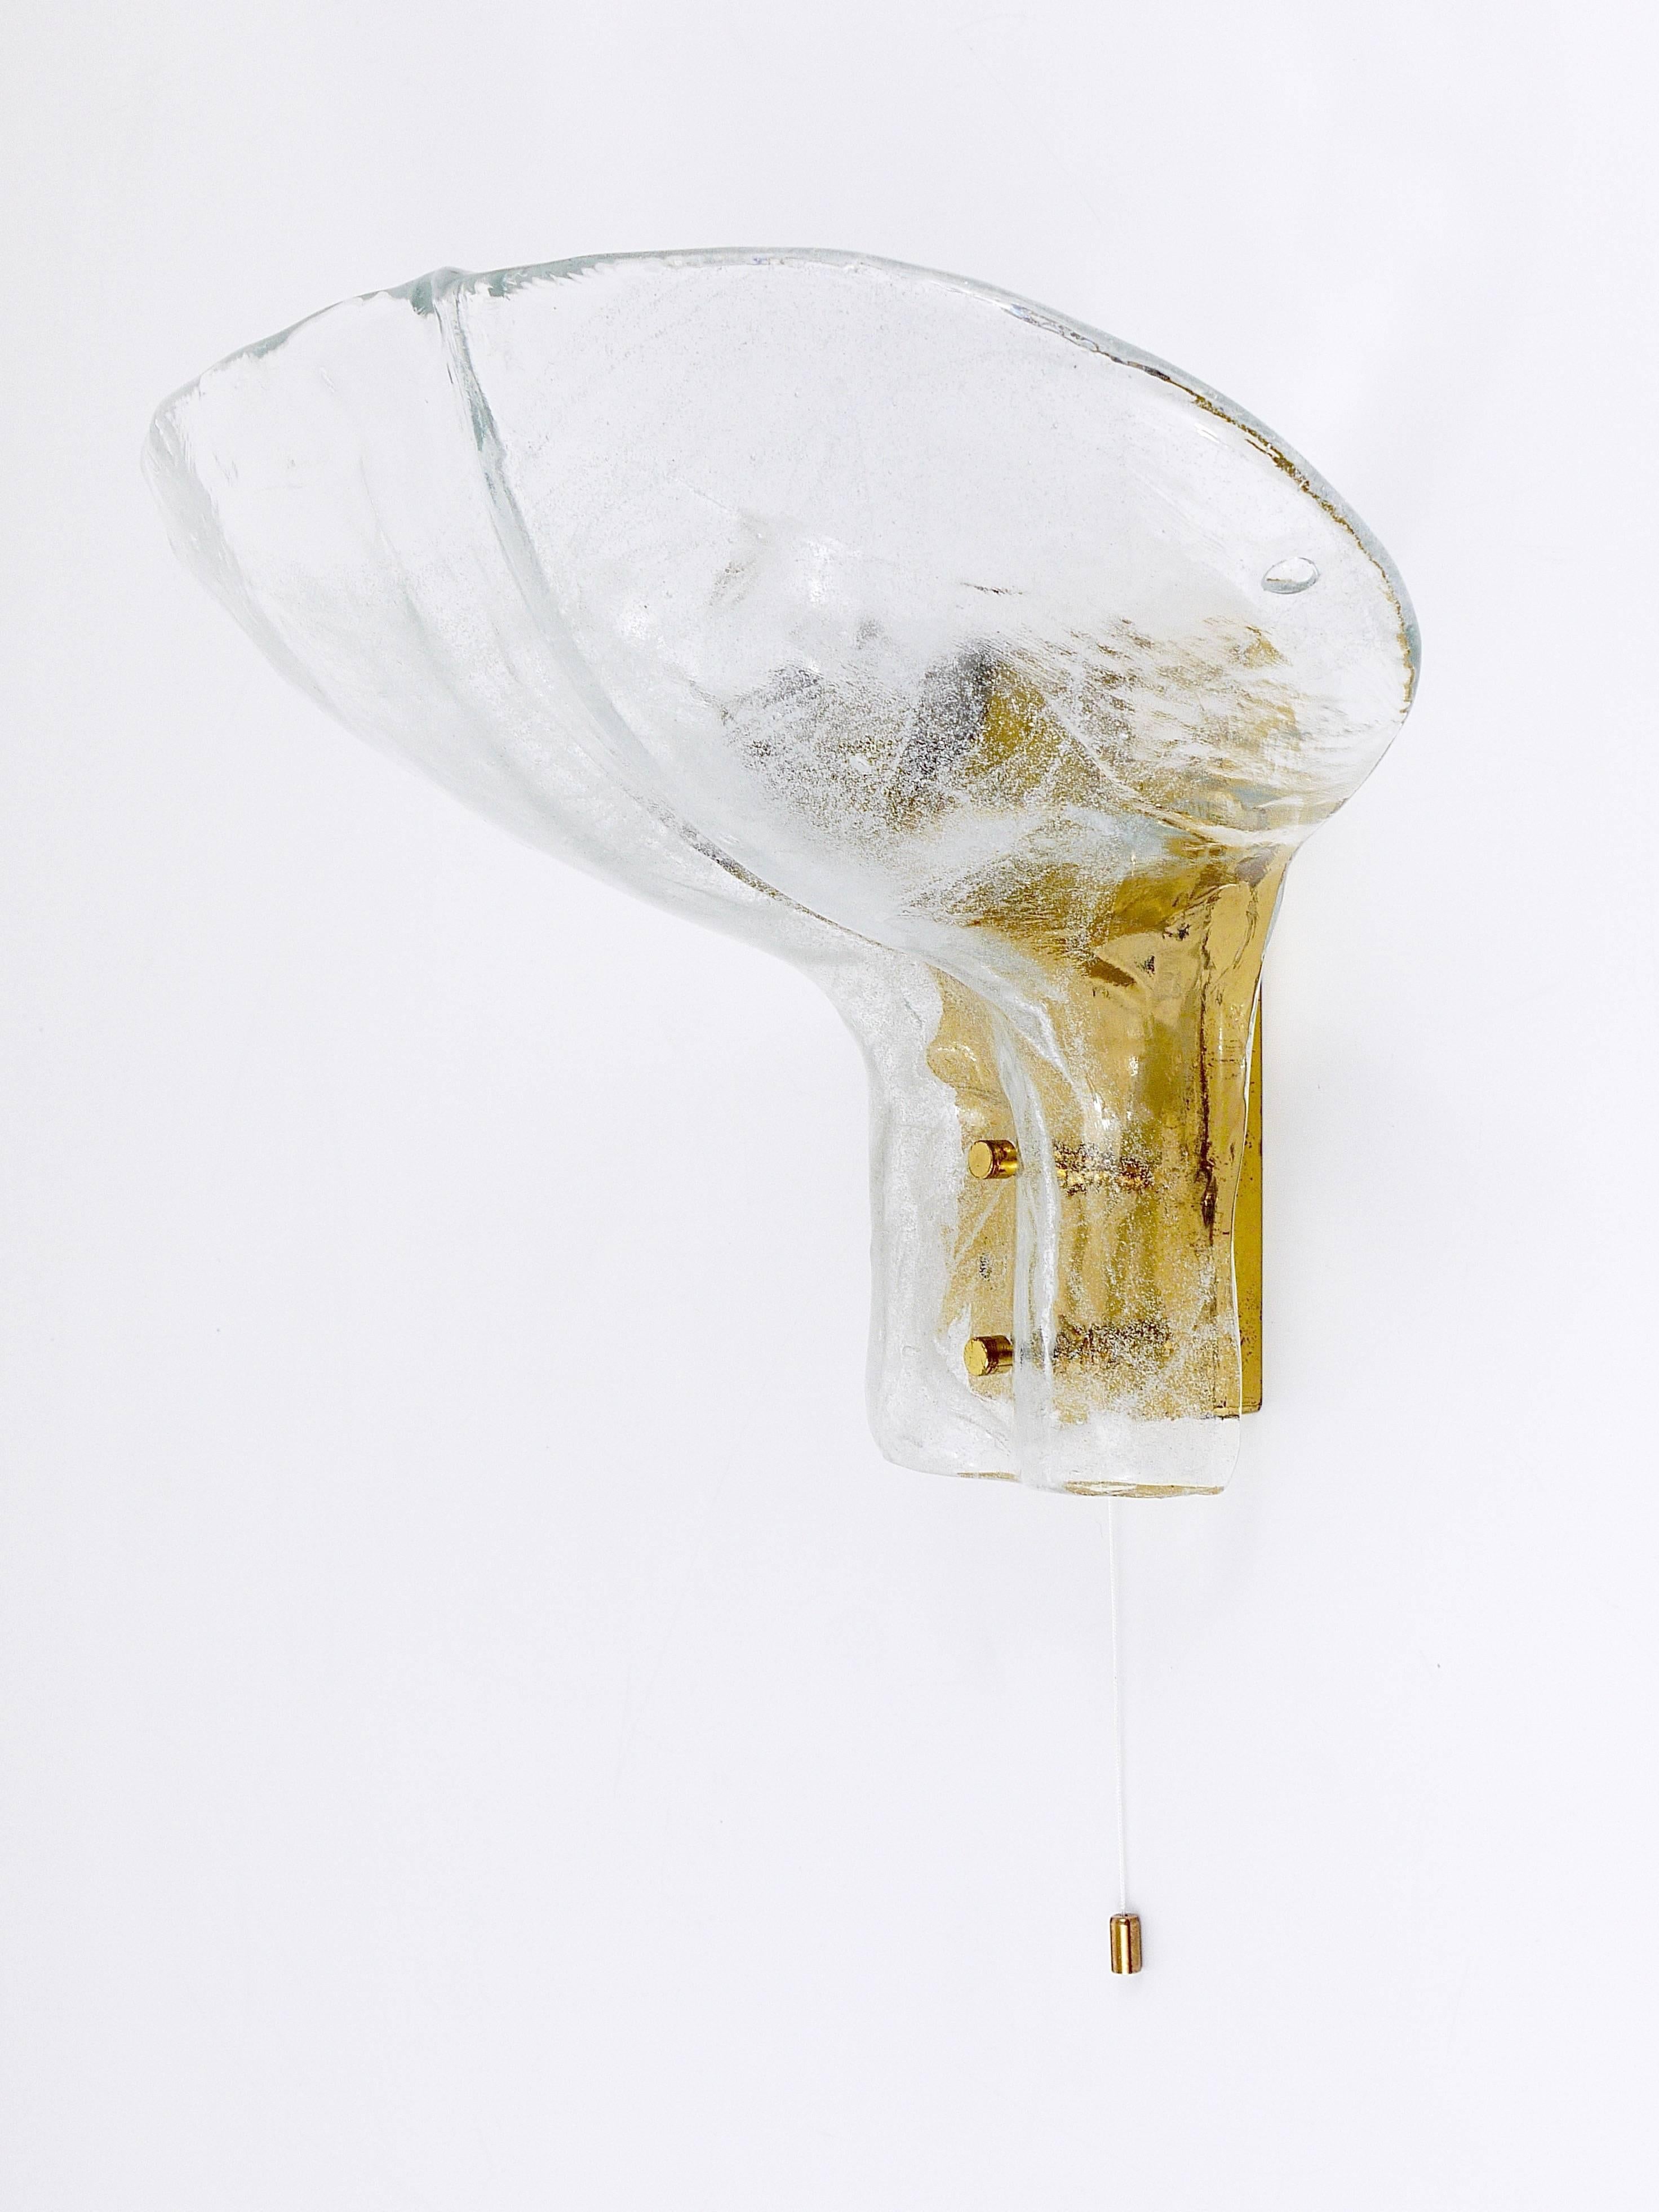 A sizable Mid-Century brass wall light with a blossom-shaped ice glass panel and integrated switch. This exquisite piece was designed and crafted by J.T. Kalmar in Vienna, Austria during the 1970s era. The lampshade is made of thick handblown clear